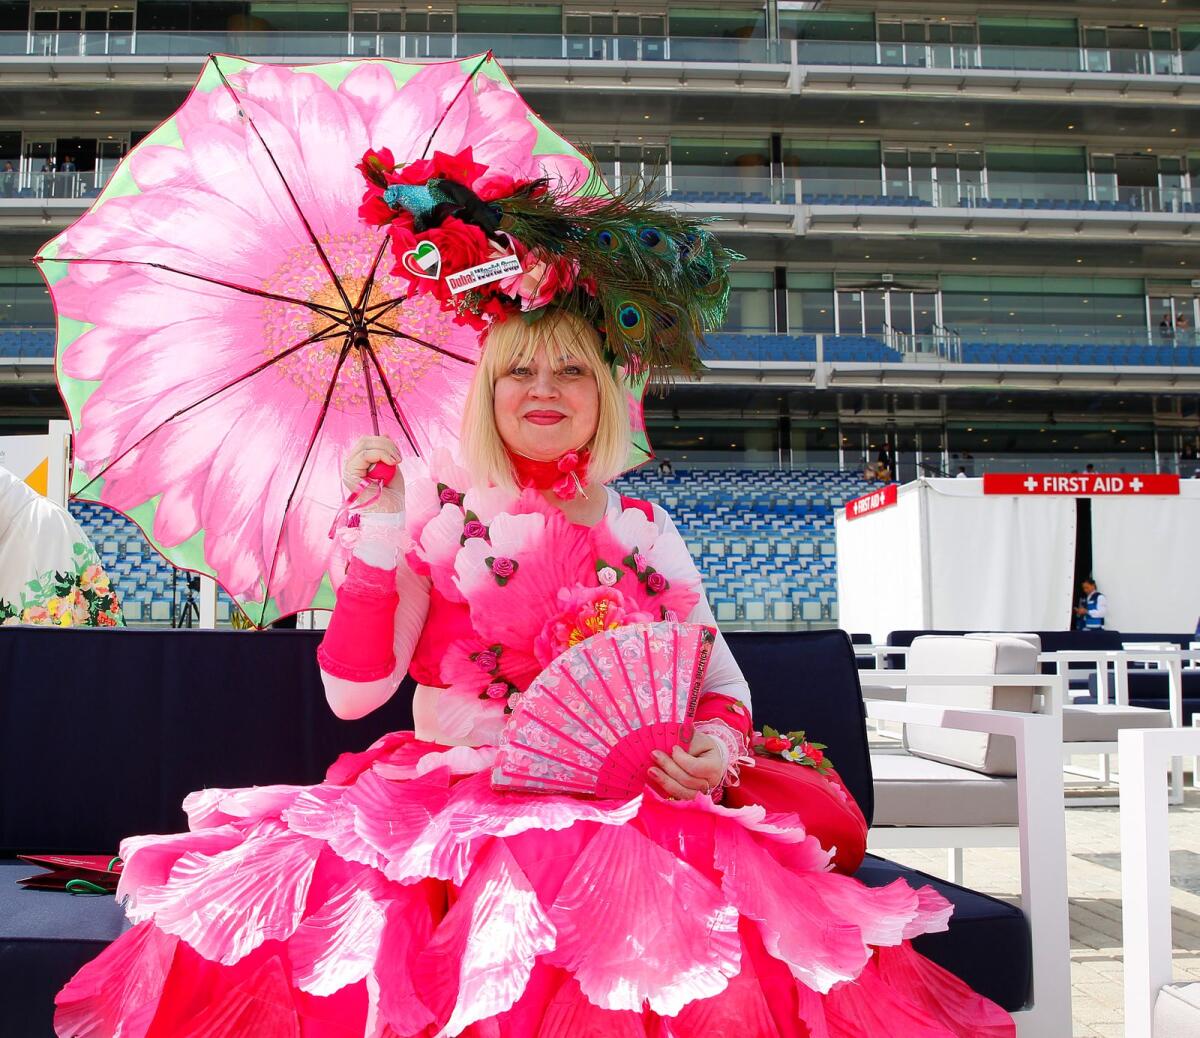 A visitor at the 2019 Dubai World Cup at Meydan Racecourse